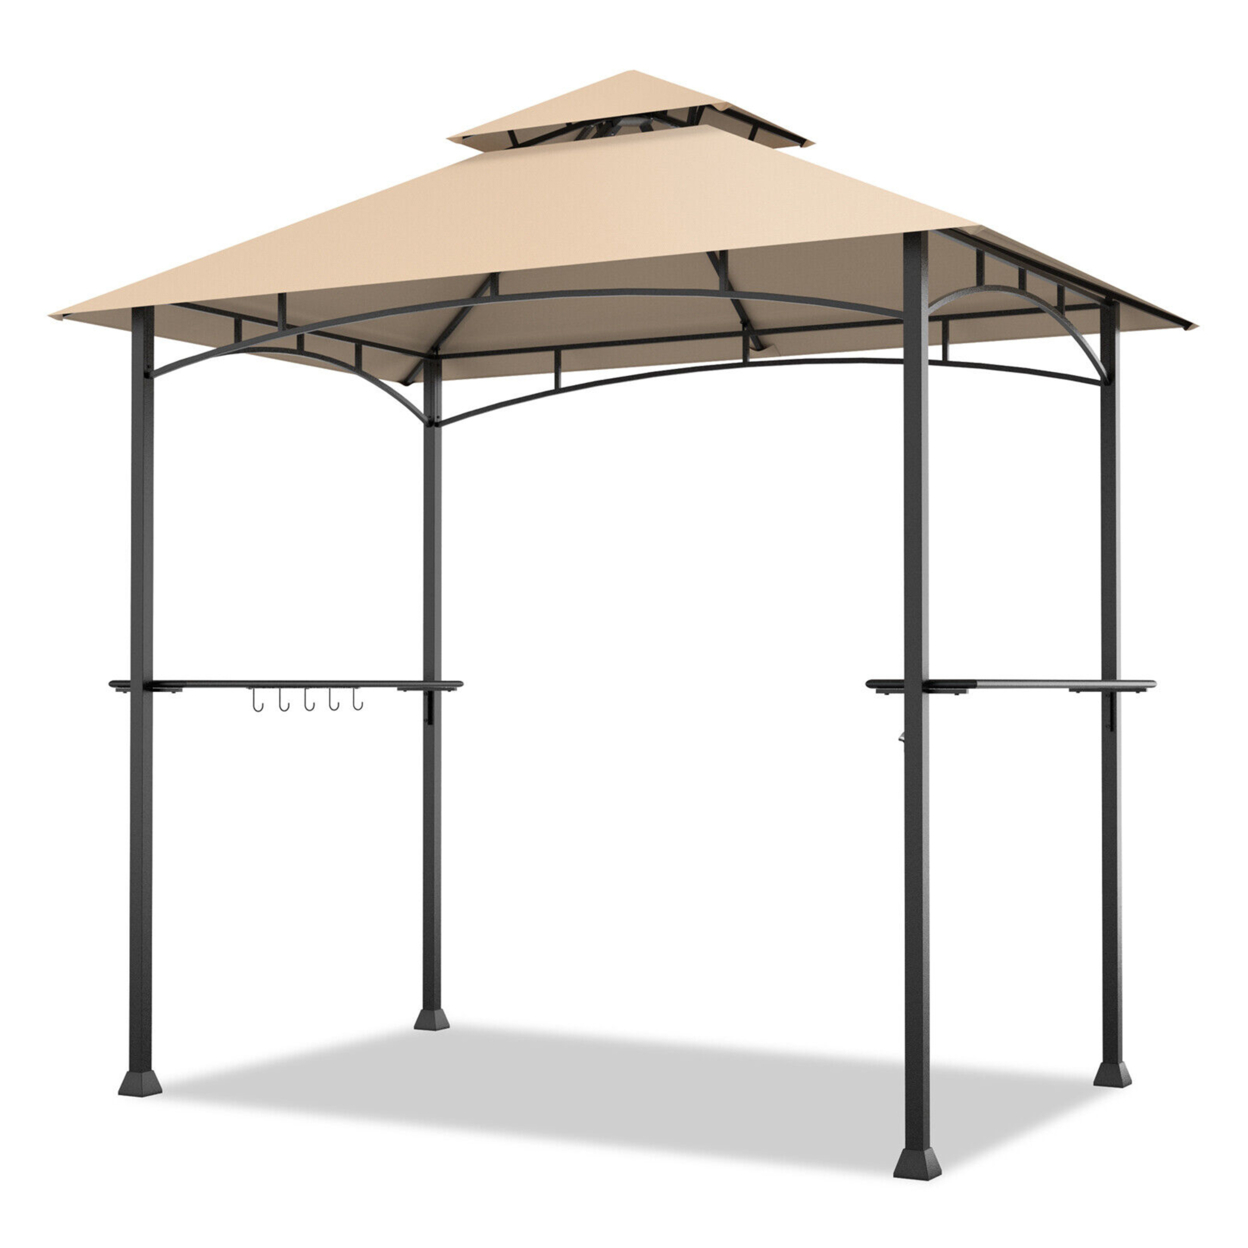 8' X 5' BBQ Grill Gazebo 2-Tier Barbecue Canopy Vented Top Shelves Shelter - Khaki